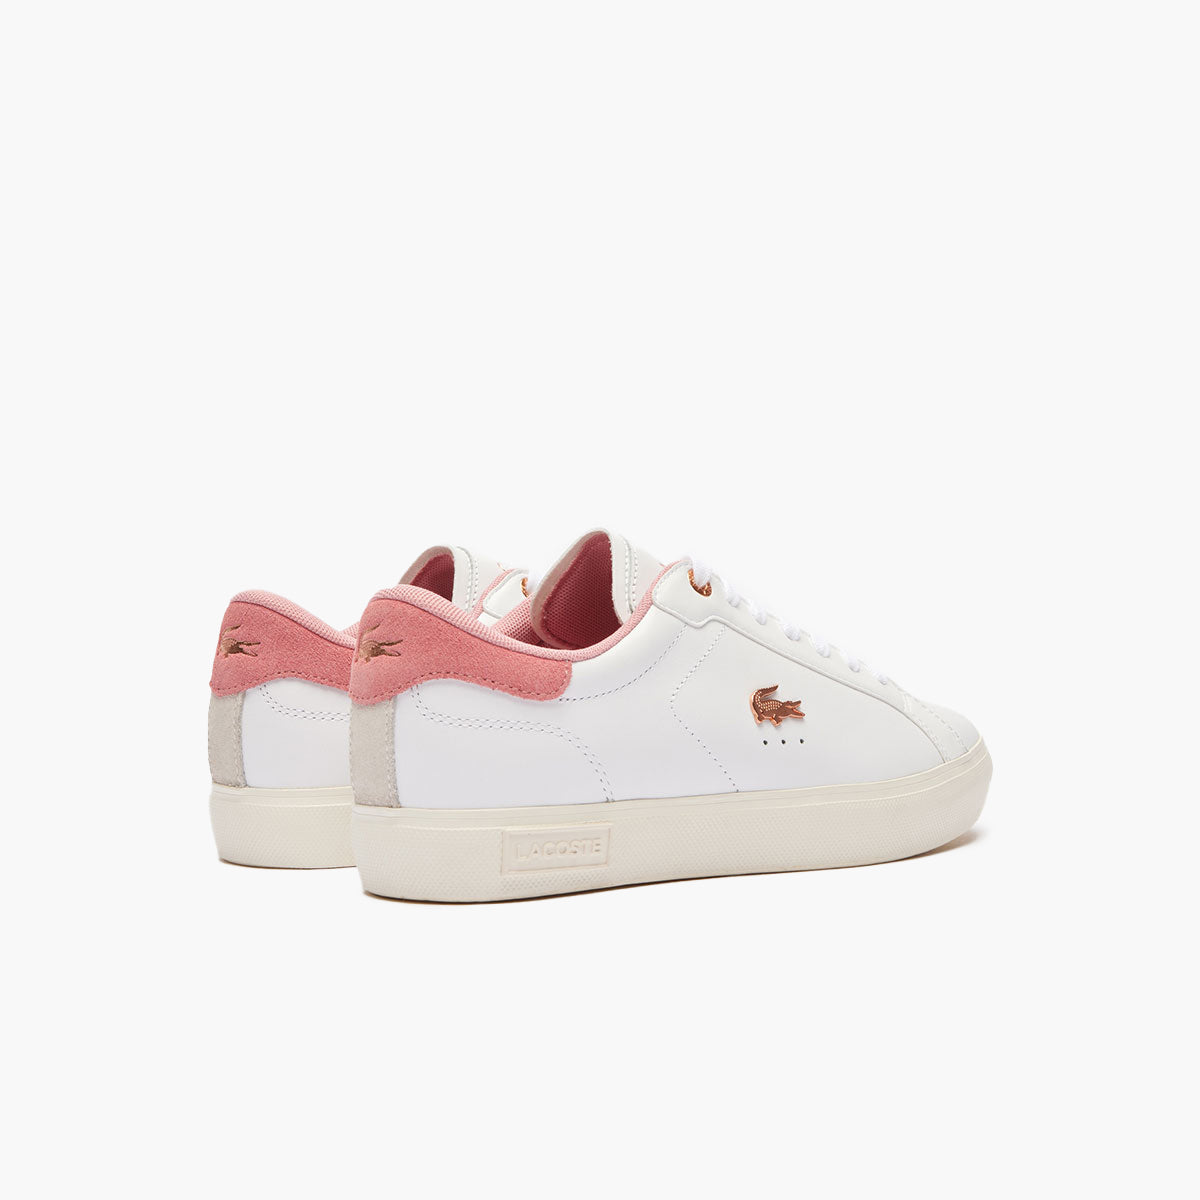 Lacoste Powercourt Leather Trainers | LEVISONS